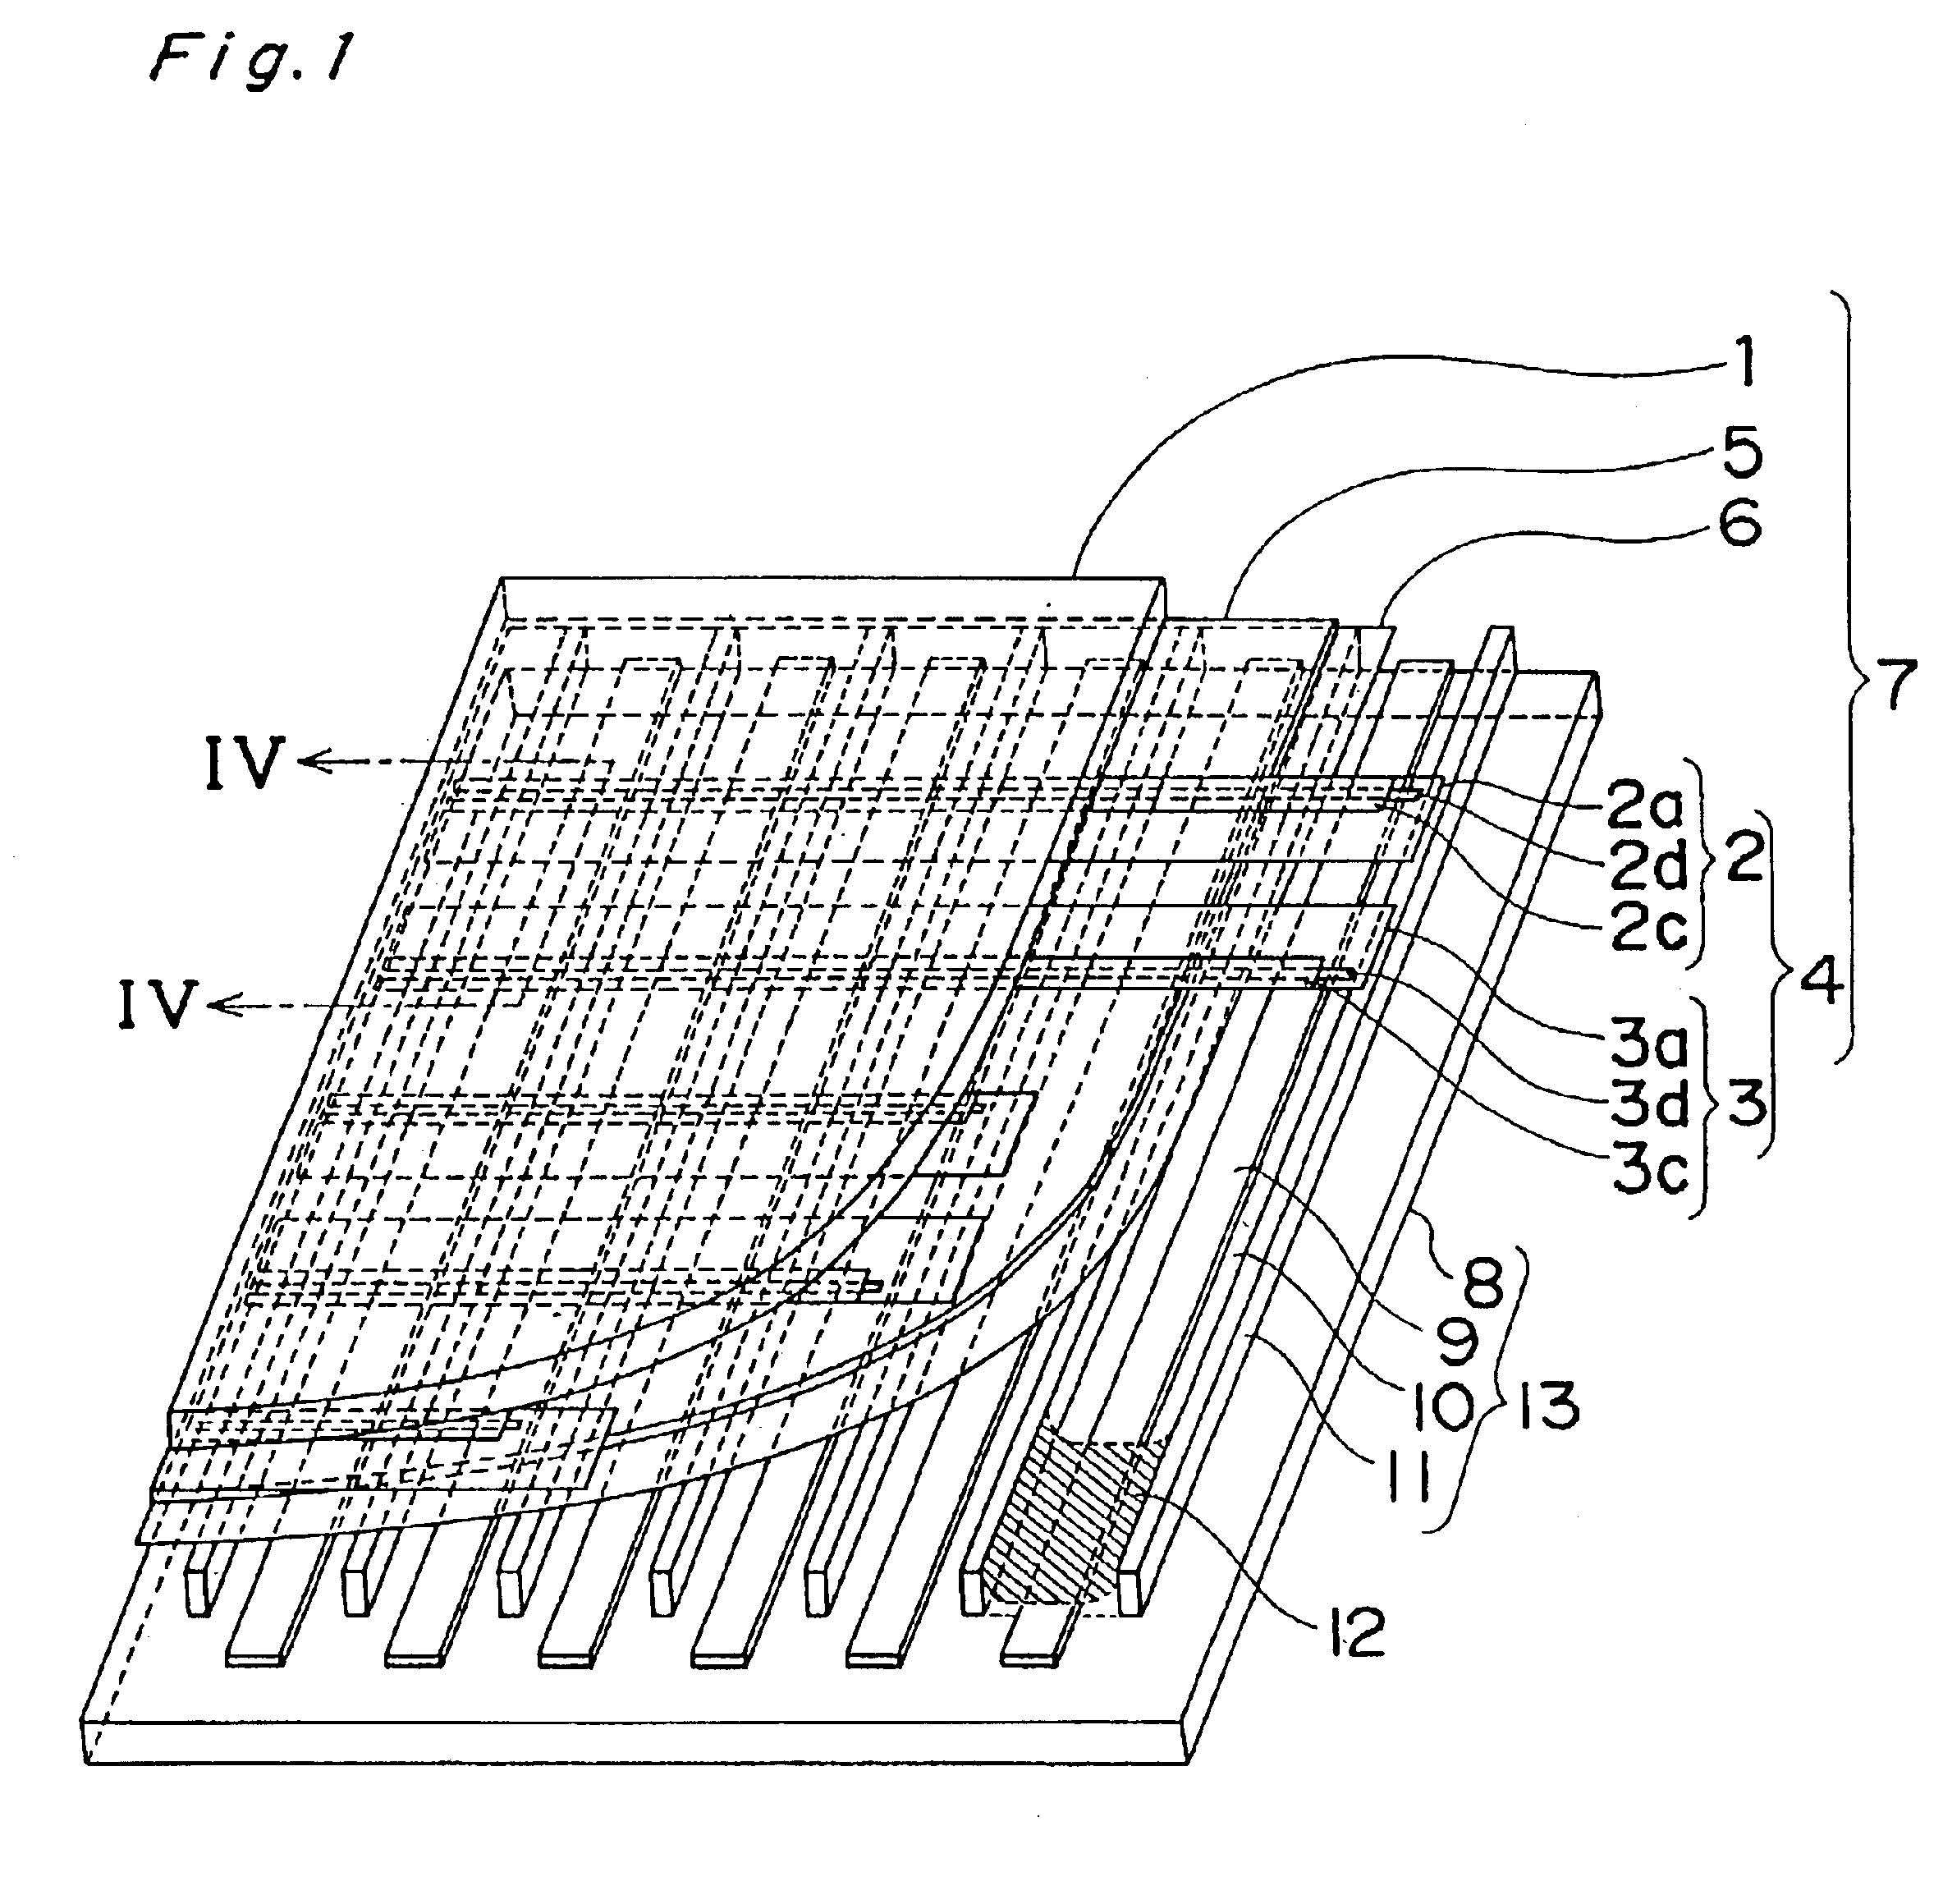 Plasma display panel that is operable to suppress the reflection of extraneous light, thereby improving the display contrast